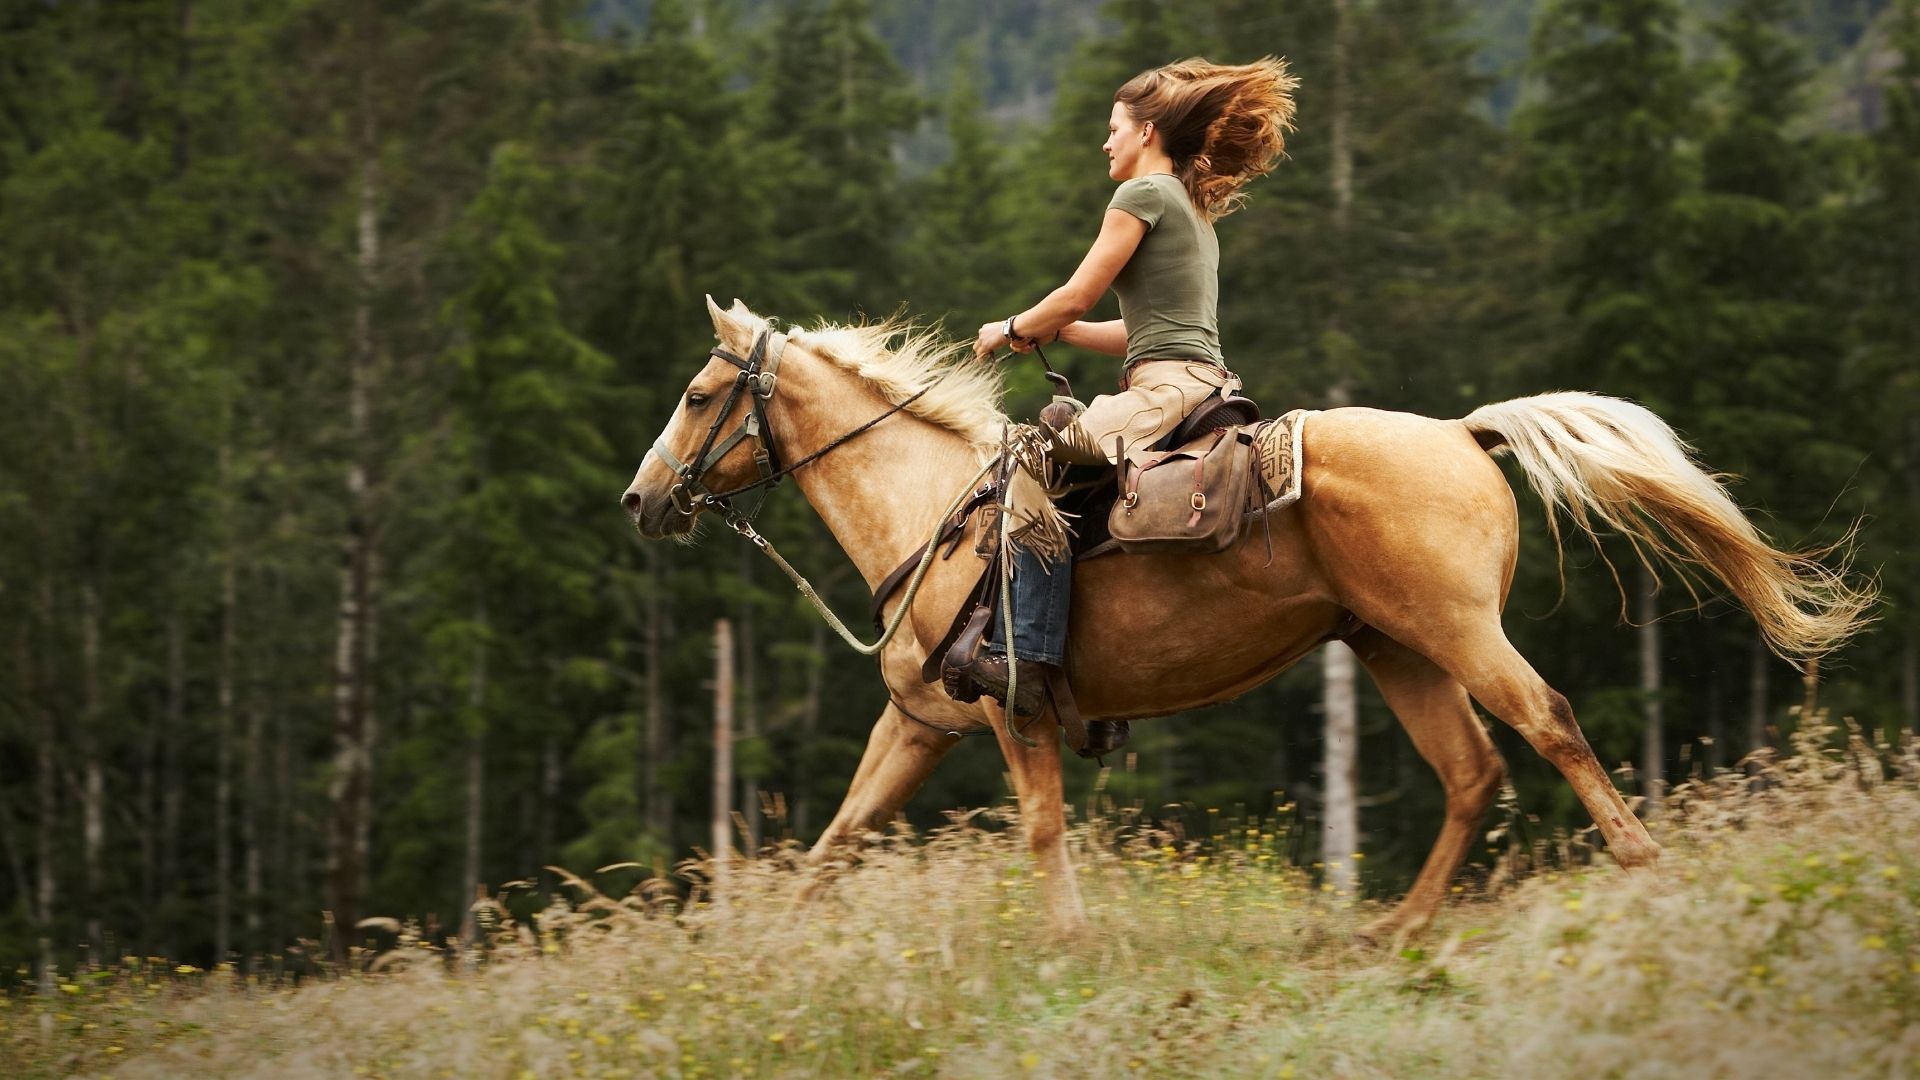 Picture of a woman horse riding on a Palomino